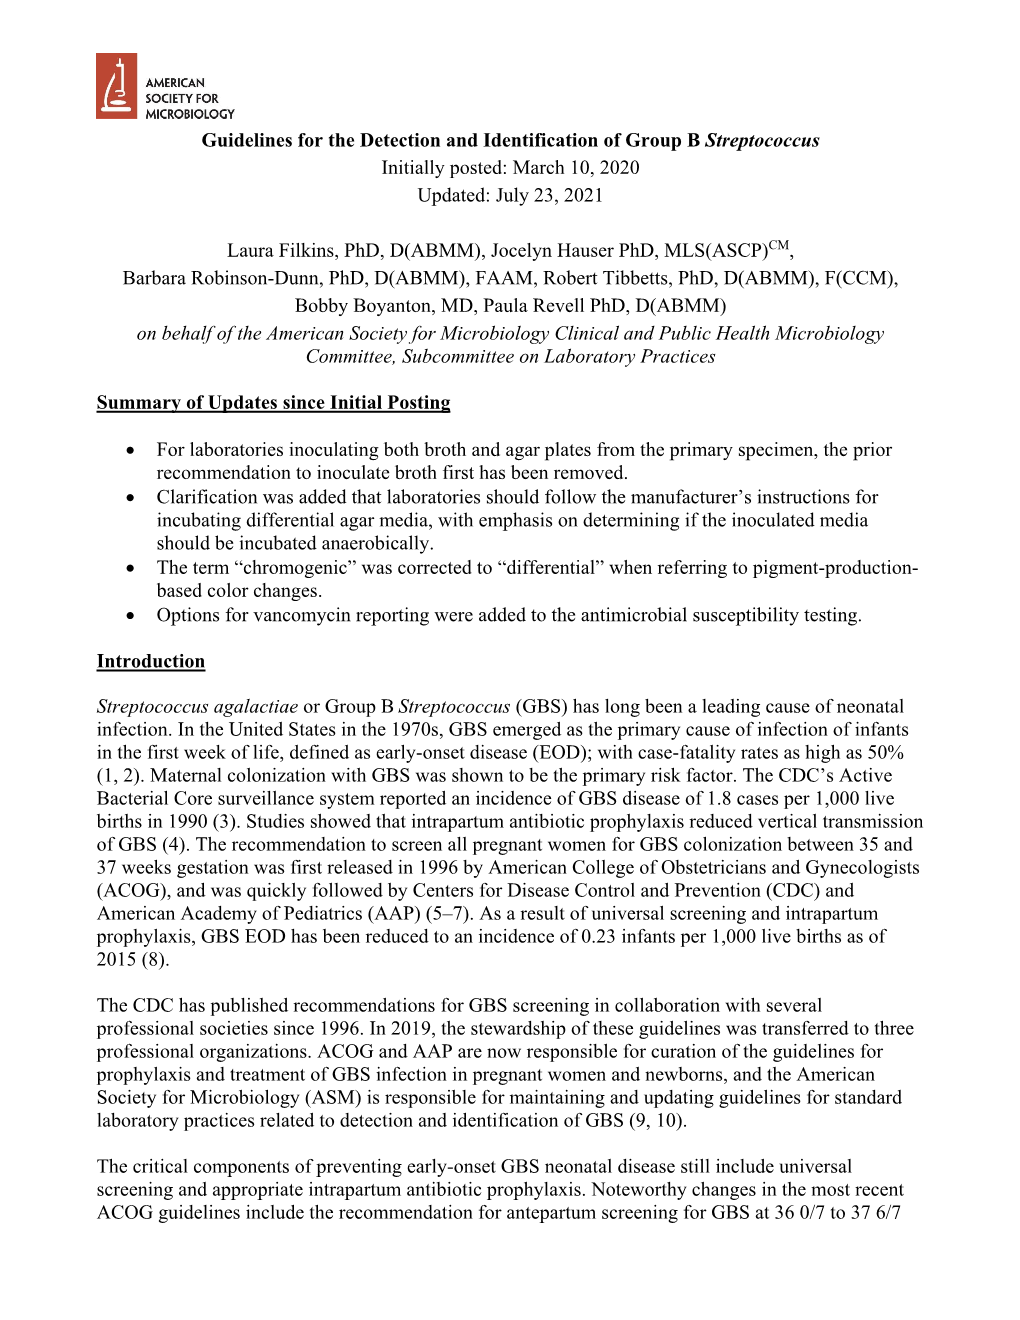 Guidelines for the Detection and Identification of Group B Streptococcus Initially Posted: March 10, 2020 Updated: July 23, 2021